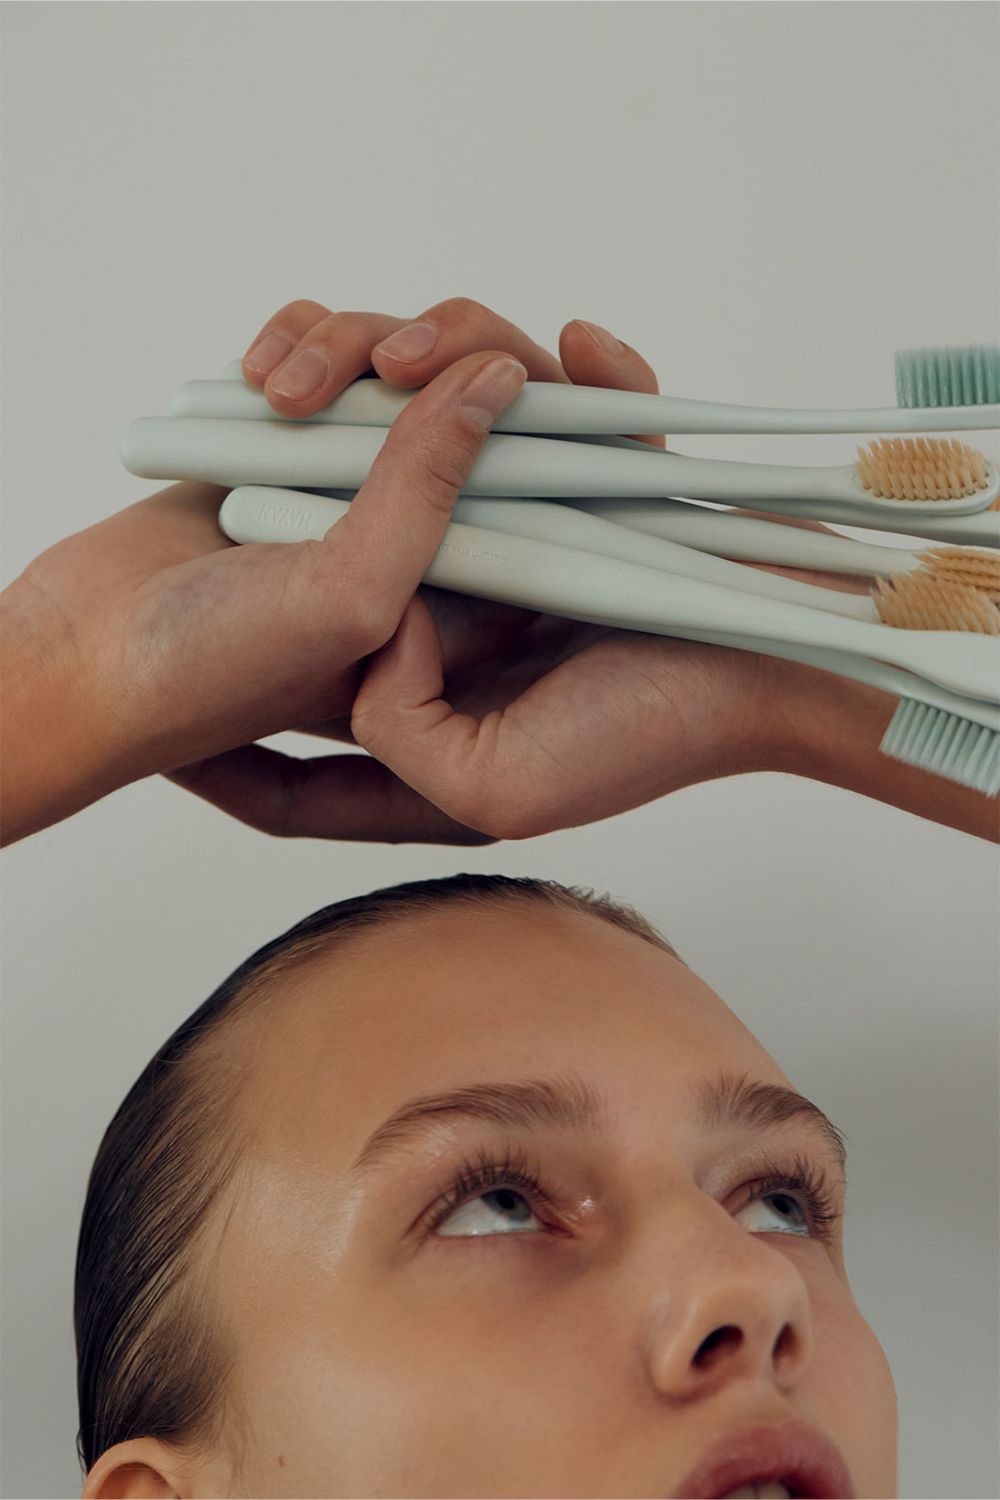 HAYAN’s Biodegradable Toothbrushes Made From Corn-Based Plastic  